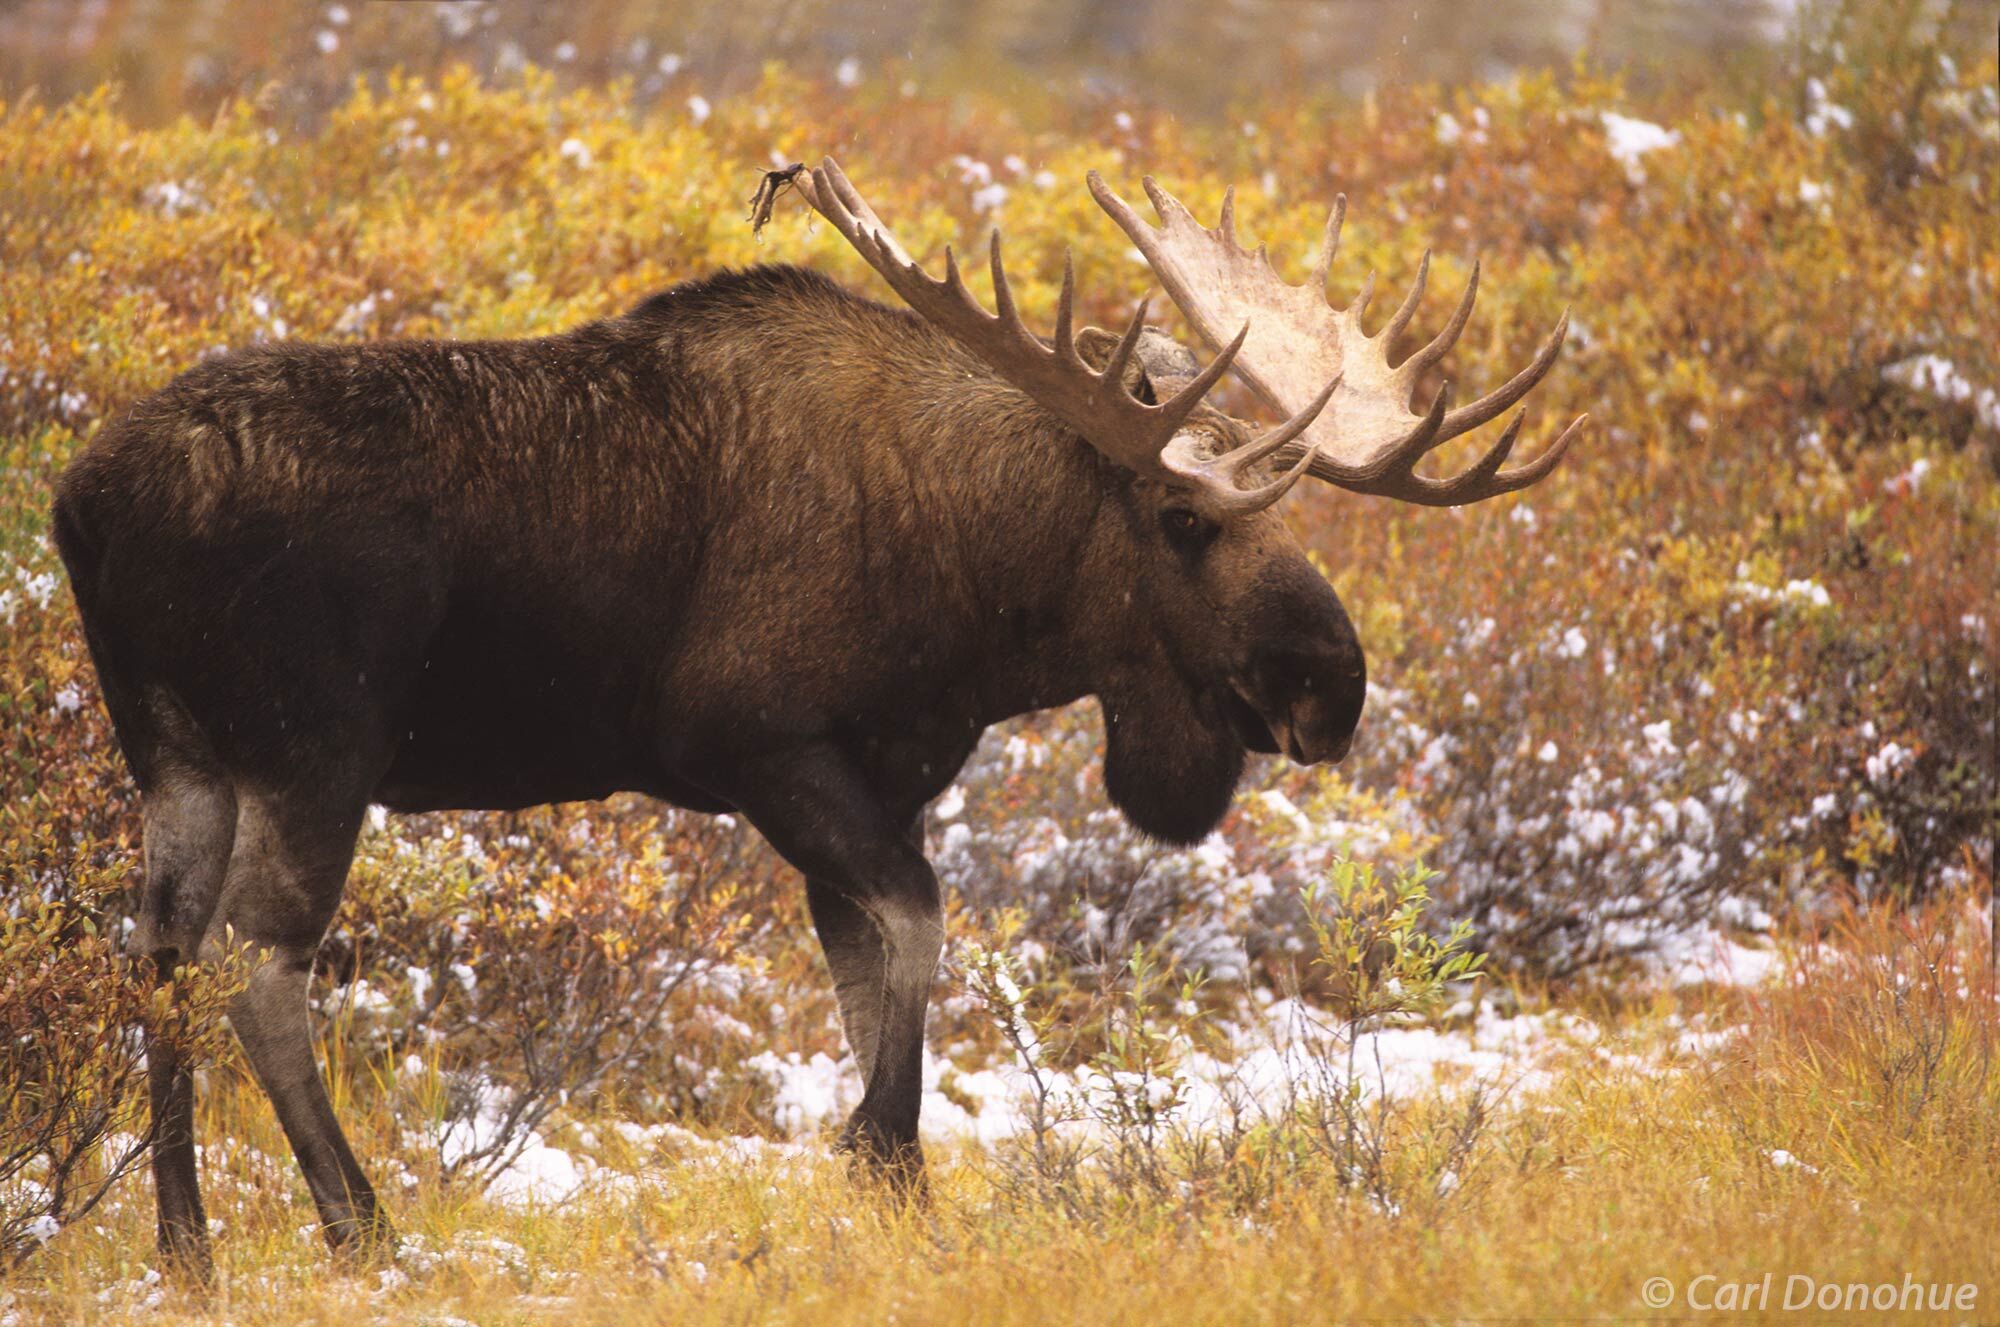 The bull moose stands strong in the face of the changing seasons, fresh snow on fall colors in the tundra. A powerful symbol...